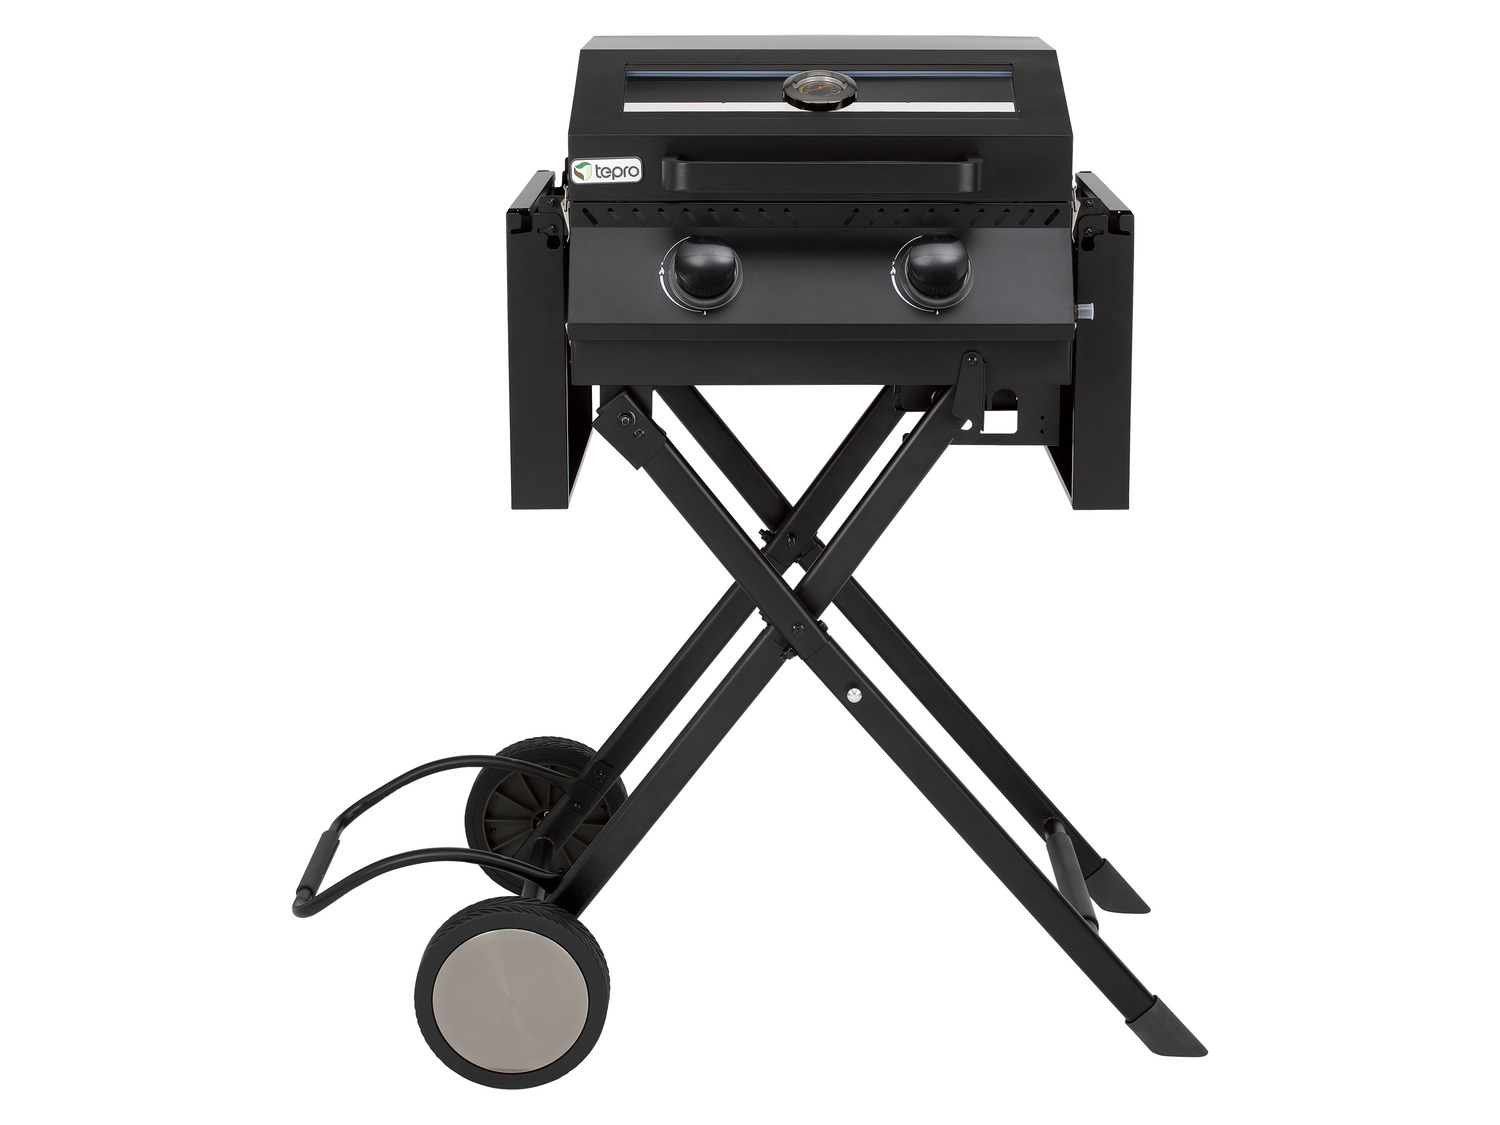 tepro »Chicago« 2 Gasgrill Edition, 6… Brenner, Special